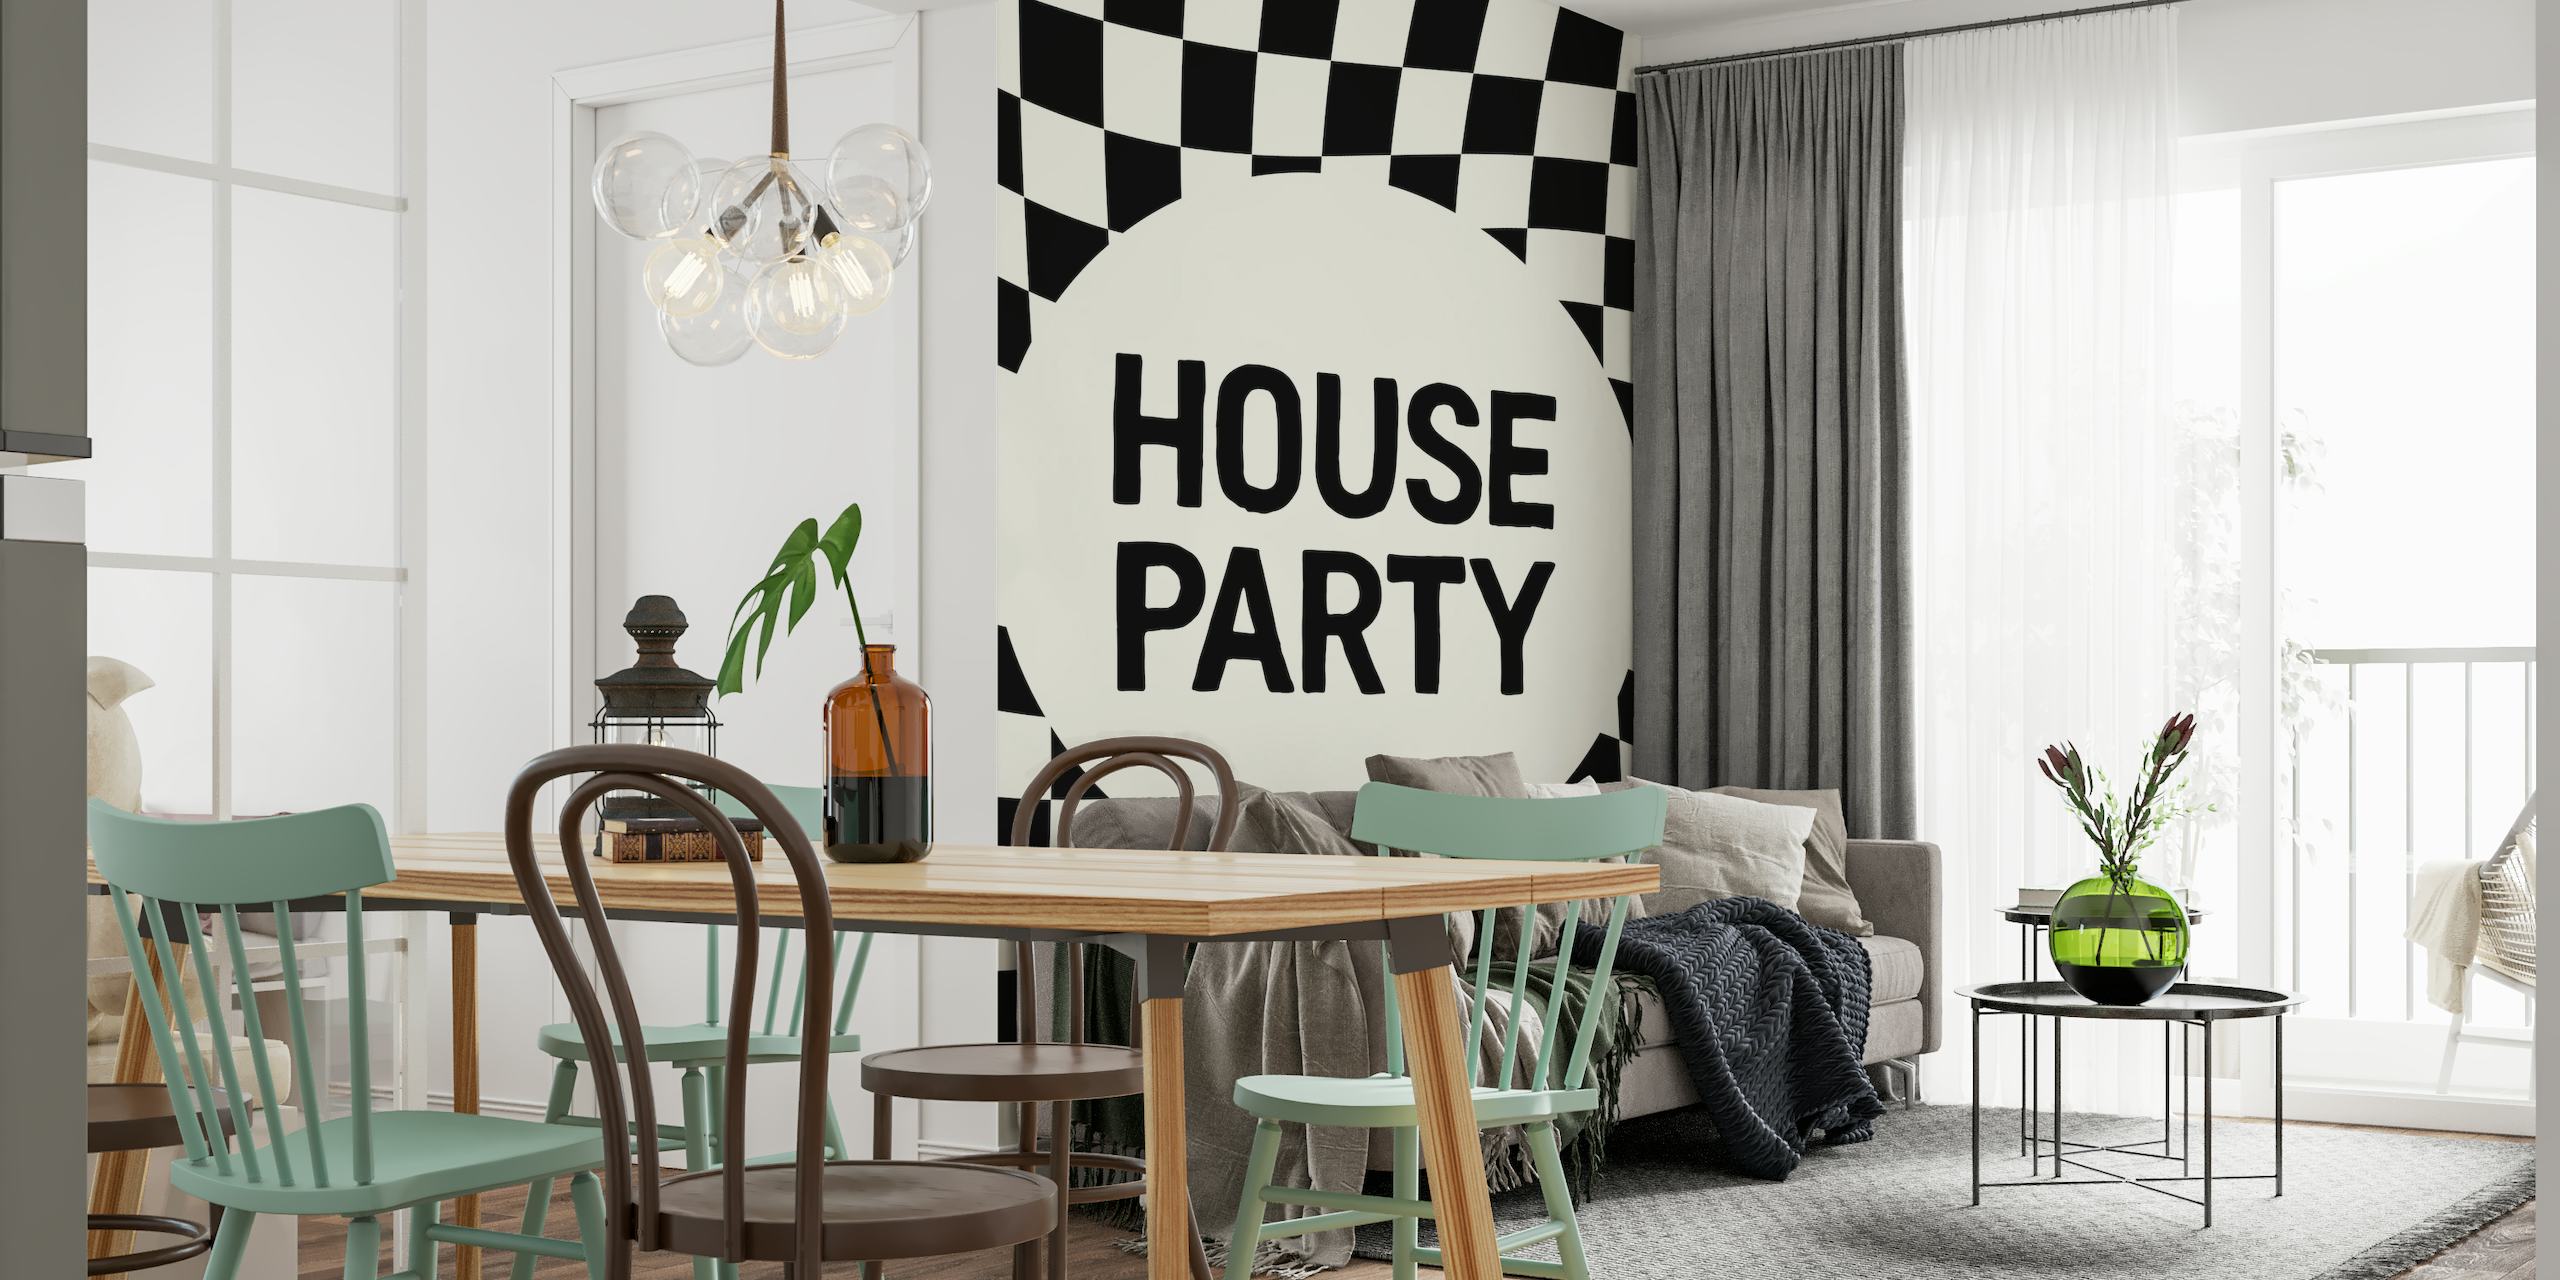 House Party wallpaper